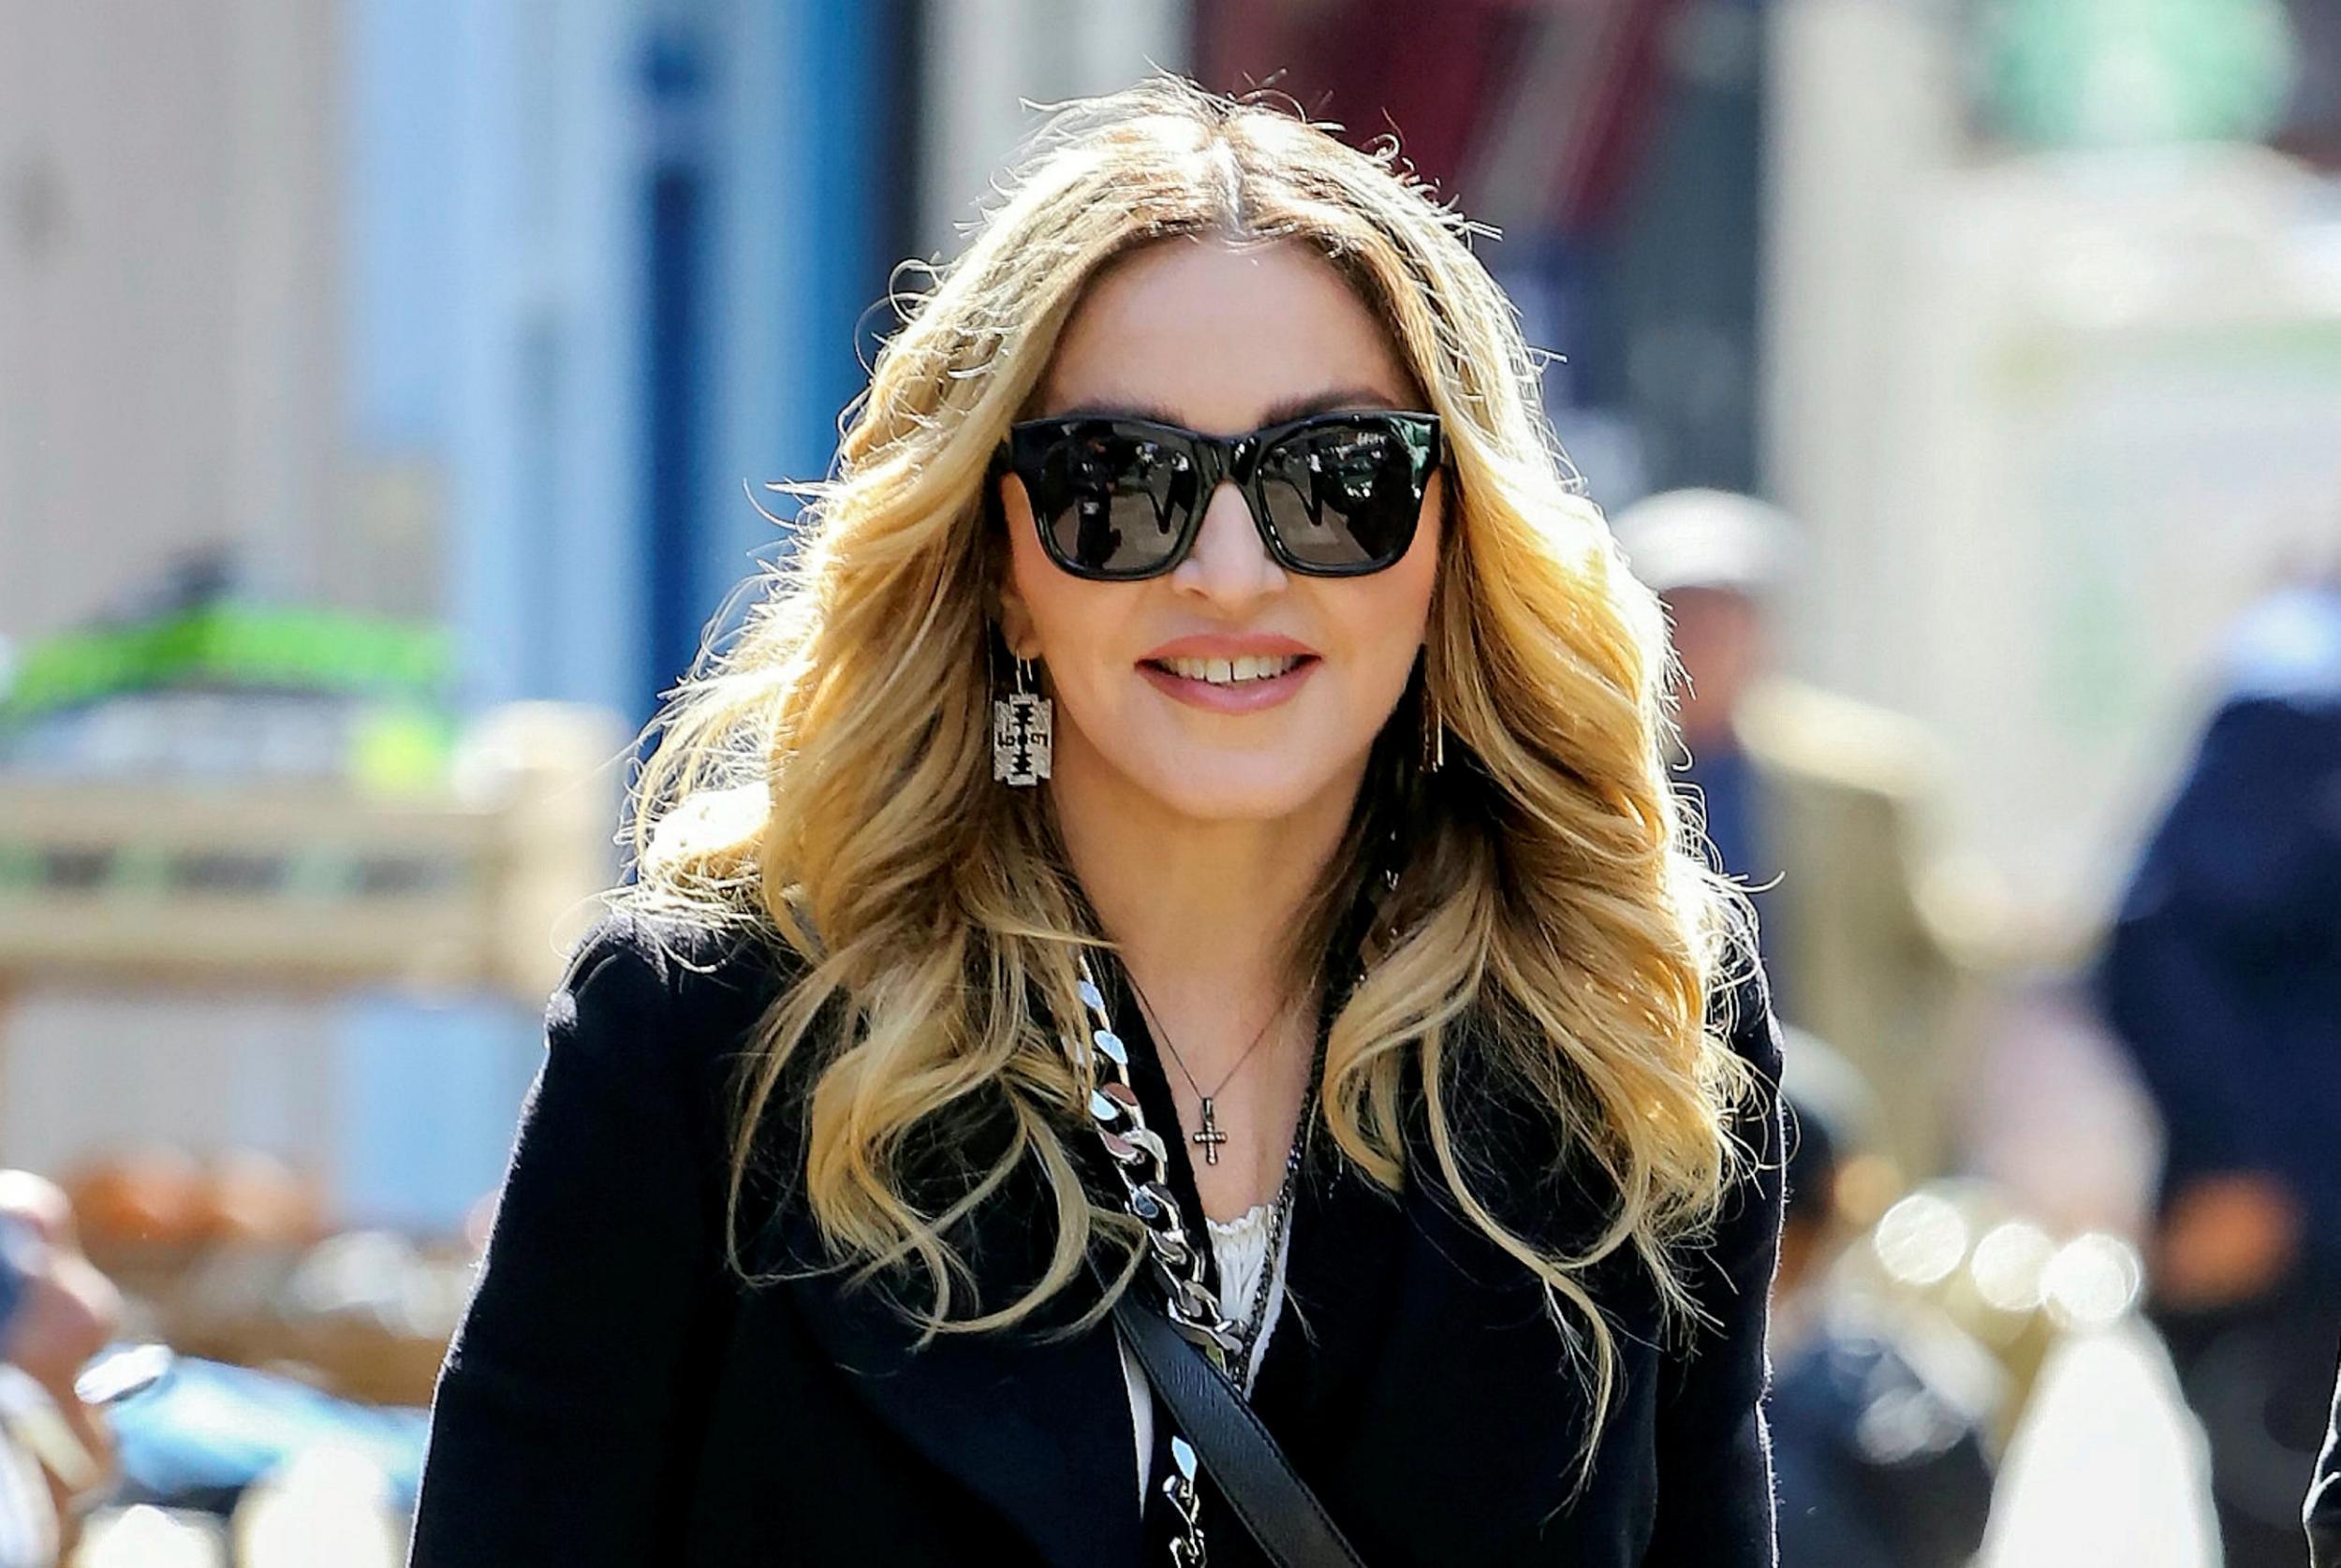 Madonna pictured wearing crucifix-inspired earrings